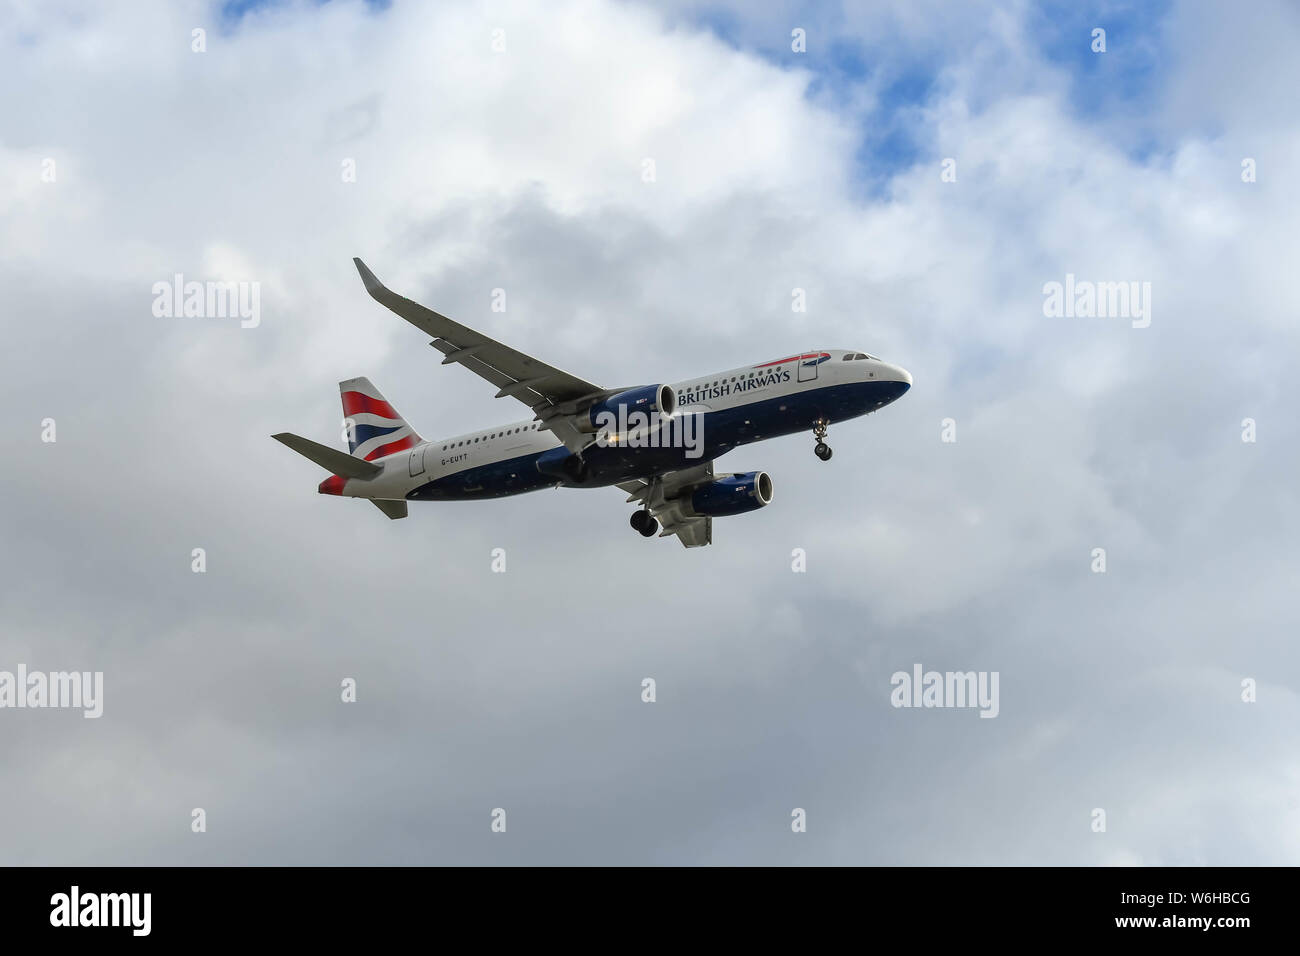 LONDON HEATHROW AIRPORT - MARCH 2019: Airbus A320 jet operated by British Airways coming in to land at London Heathrow Airport. Stock Photo